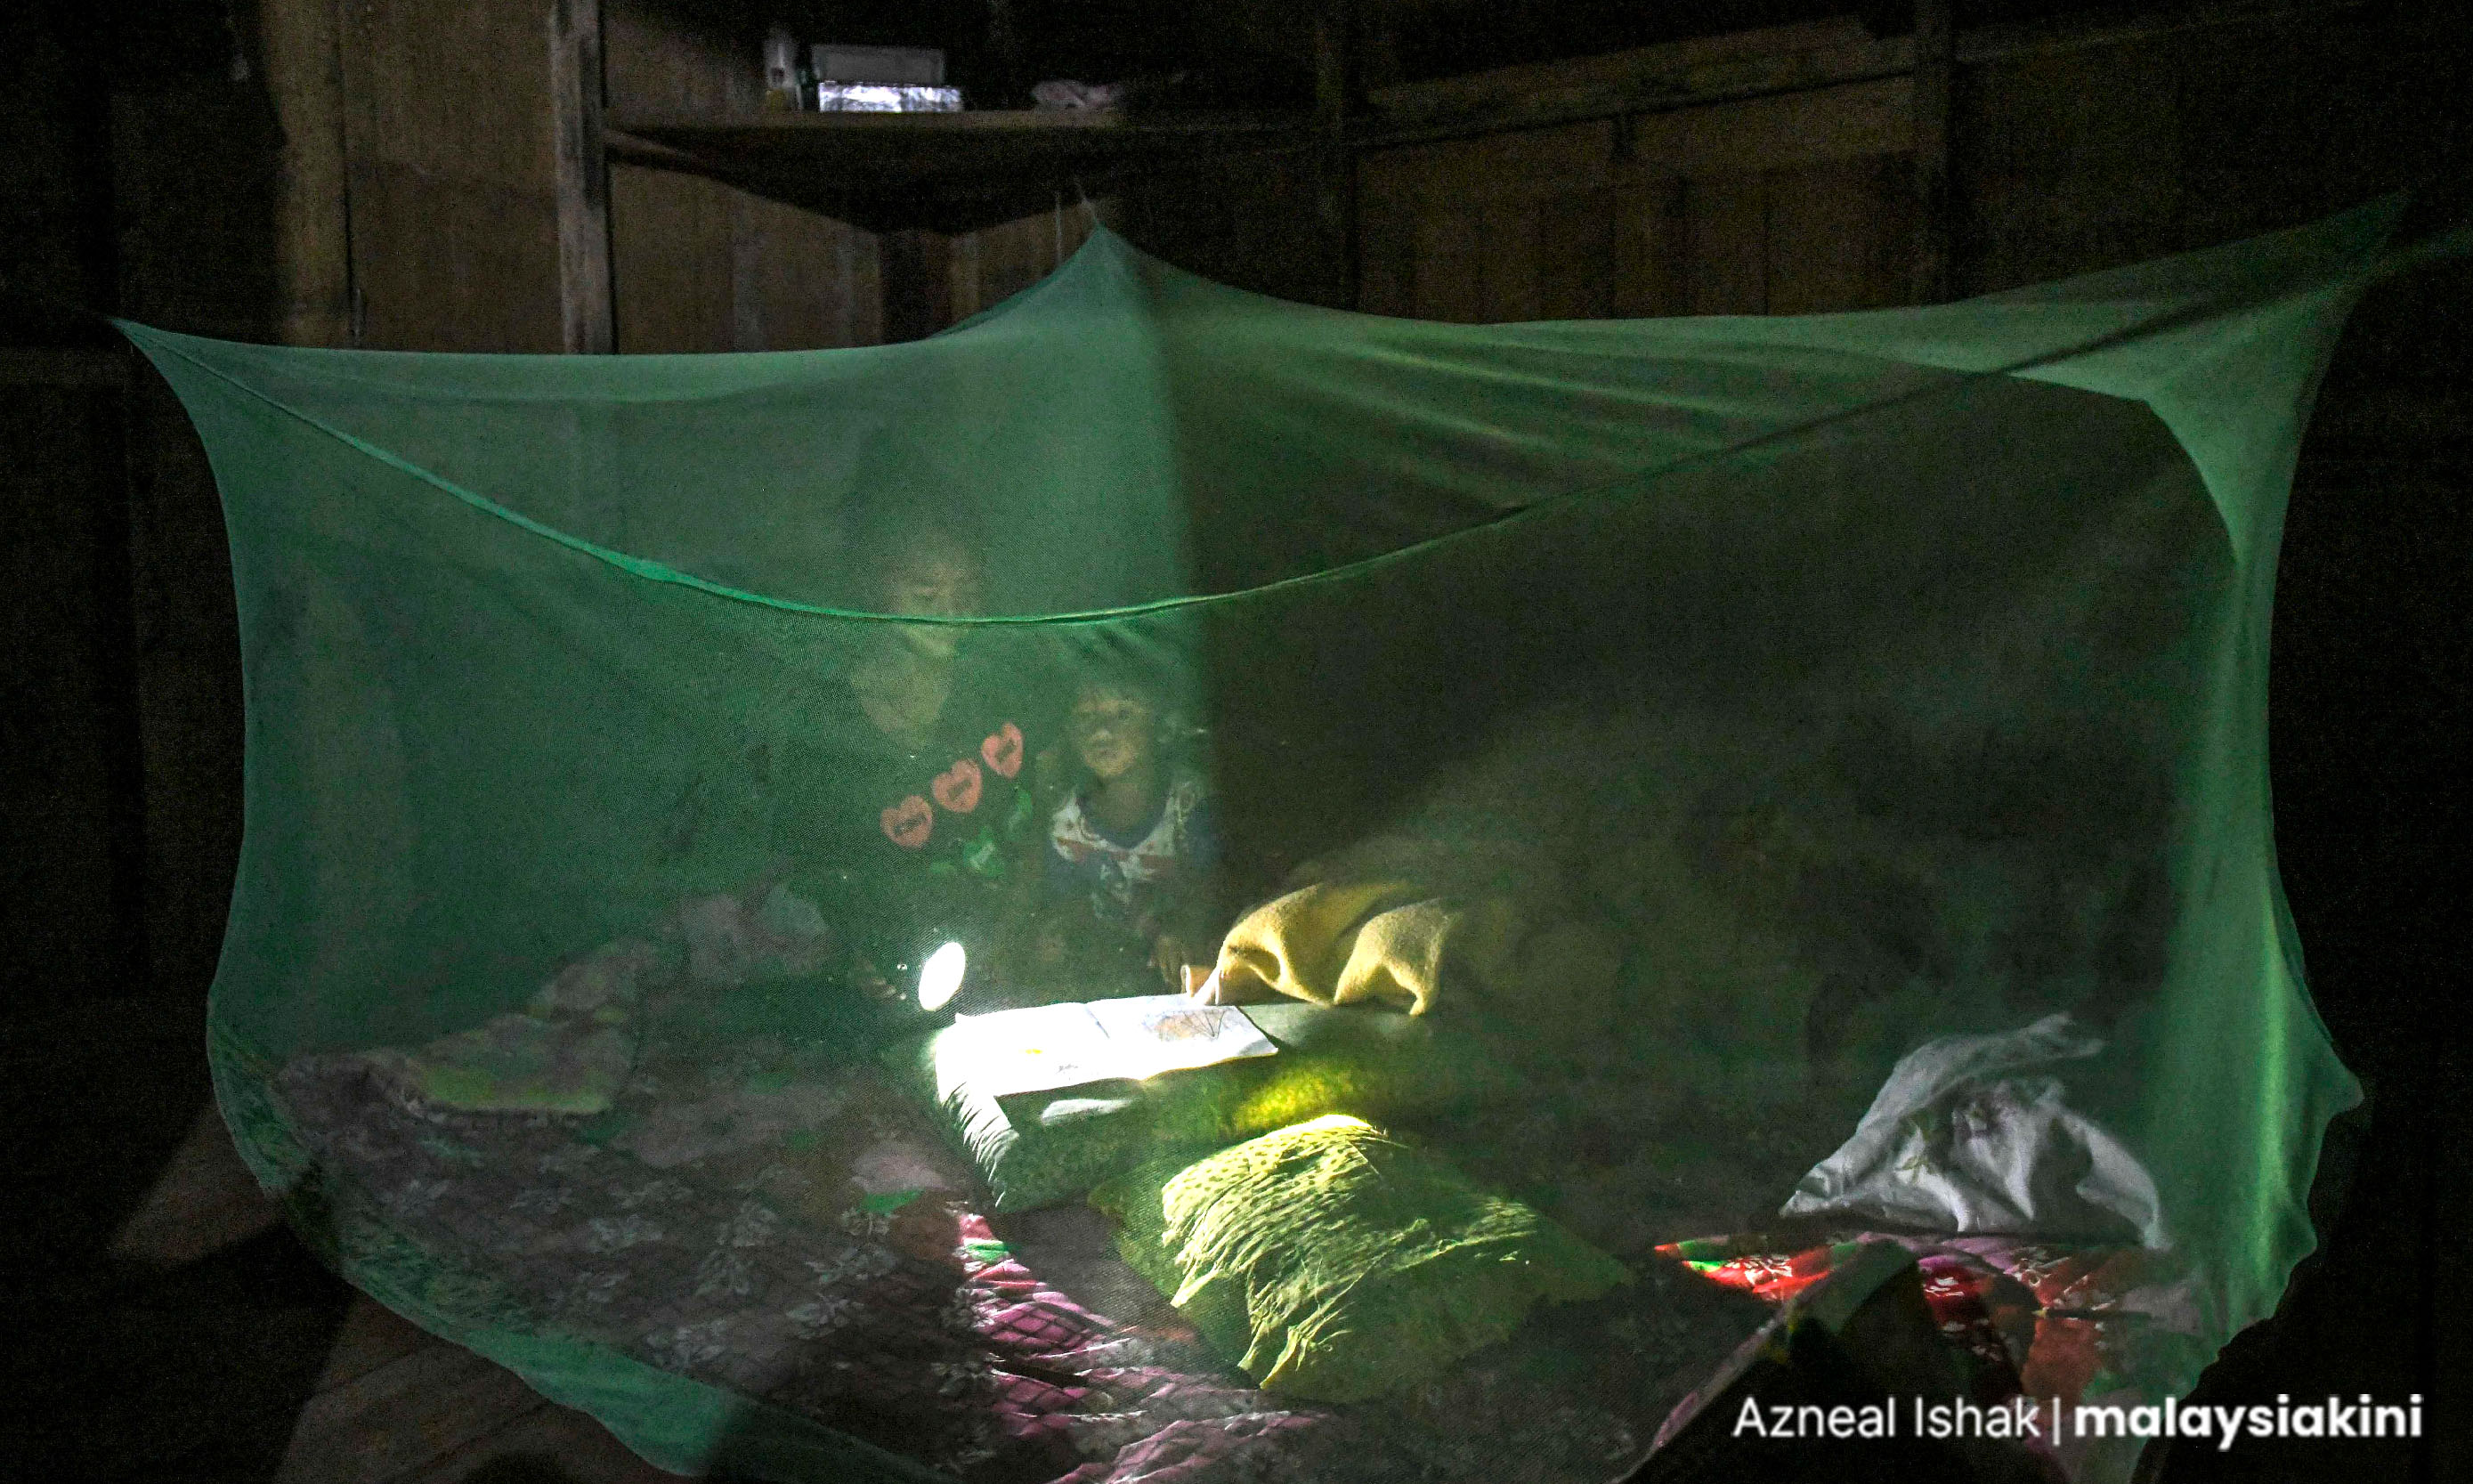 In Pos Lanai, Pahang, a mother reads her son a bedtime story using a battery-powered torchlight.